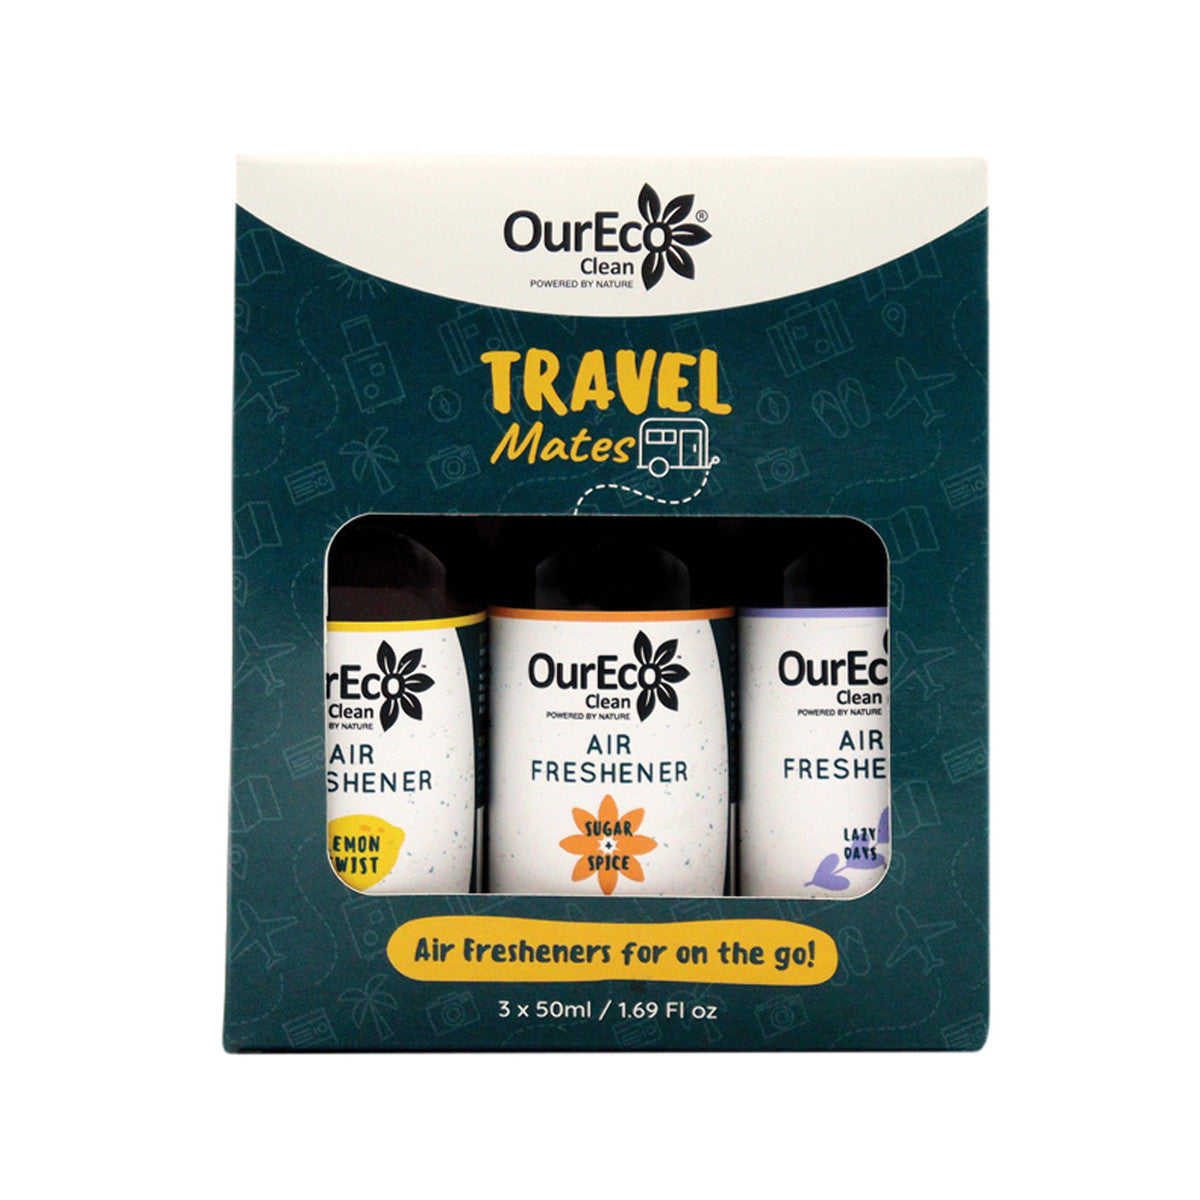 OURECO CLEAN Air Freshener Travel Mates 50ml x 3 Pack (contains: Lazy Days, Sugar & Spice & Lemon Twist)